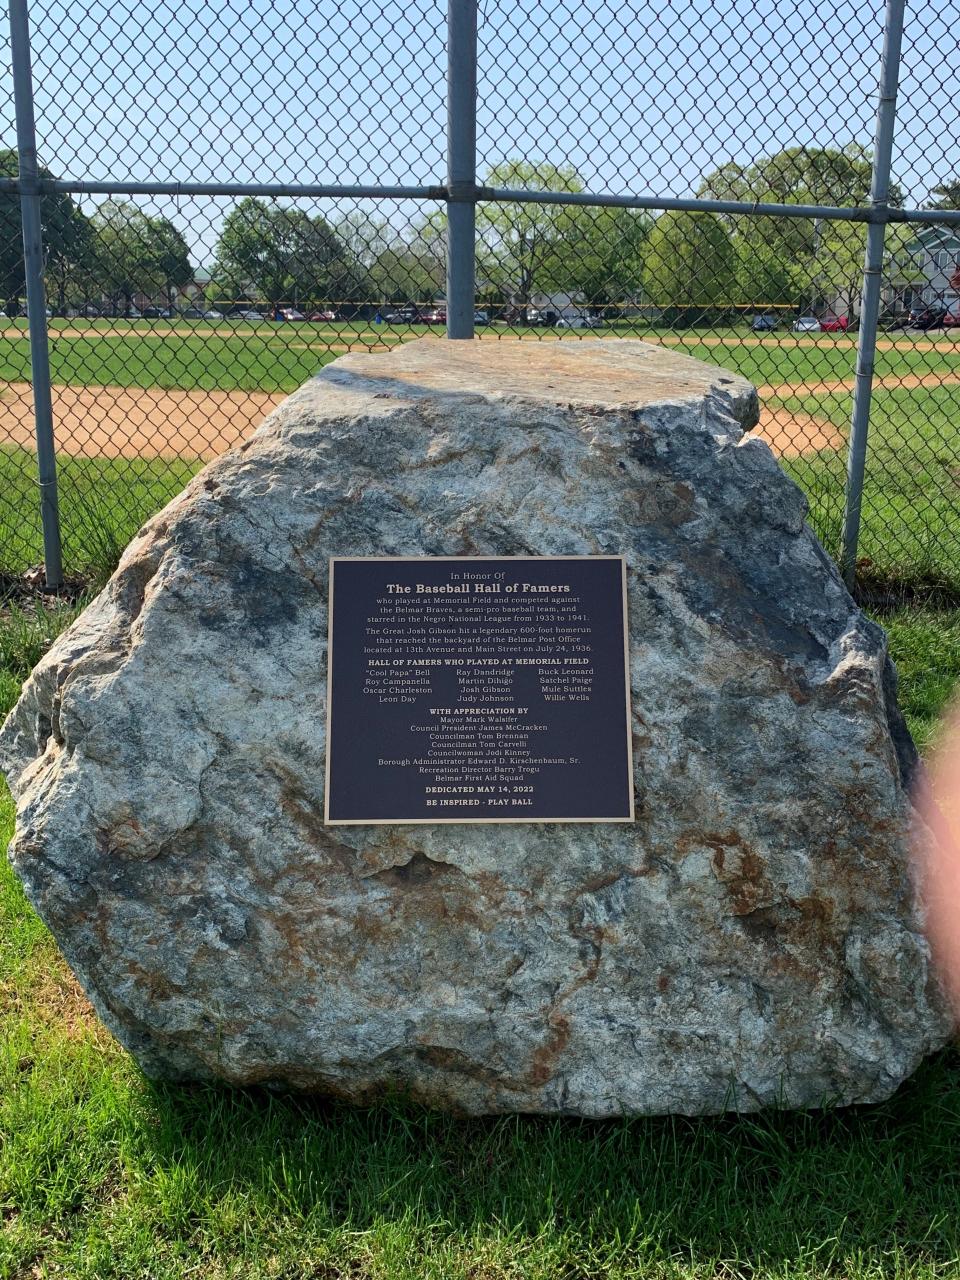 A plaque affixed to a rock behind home plate at Belmar Memorial Field honors the baseball hall of famers who played there, including Josh Gibson.